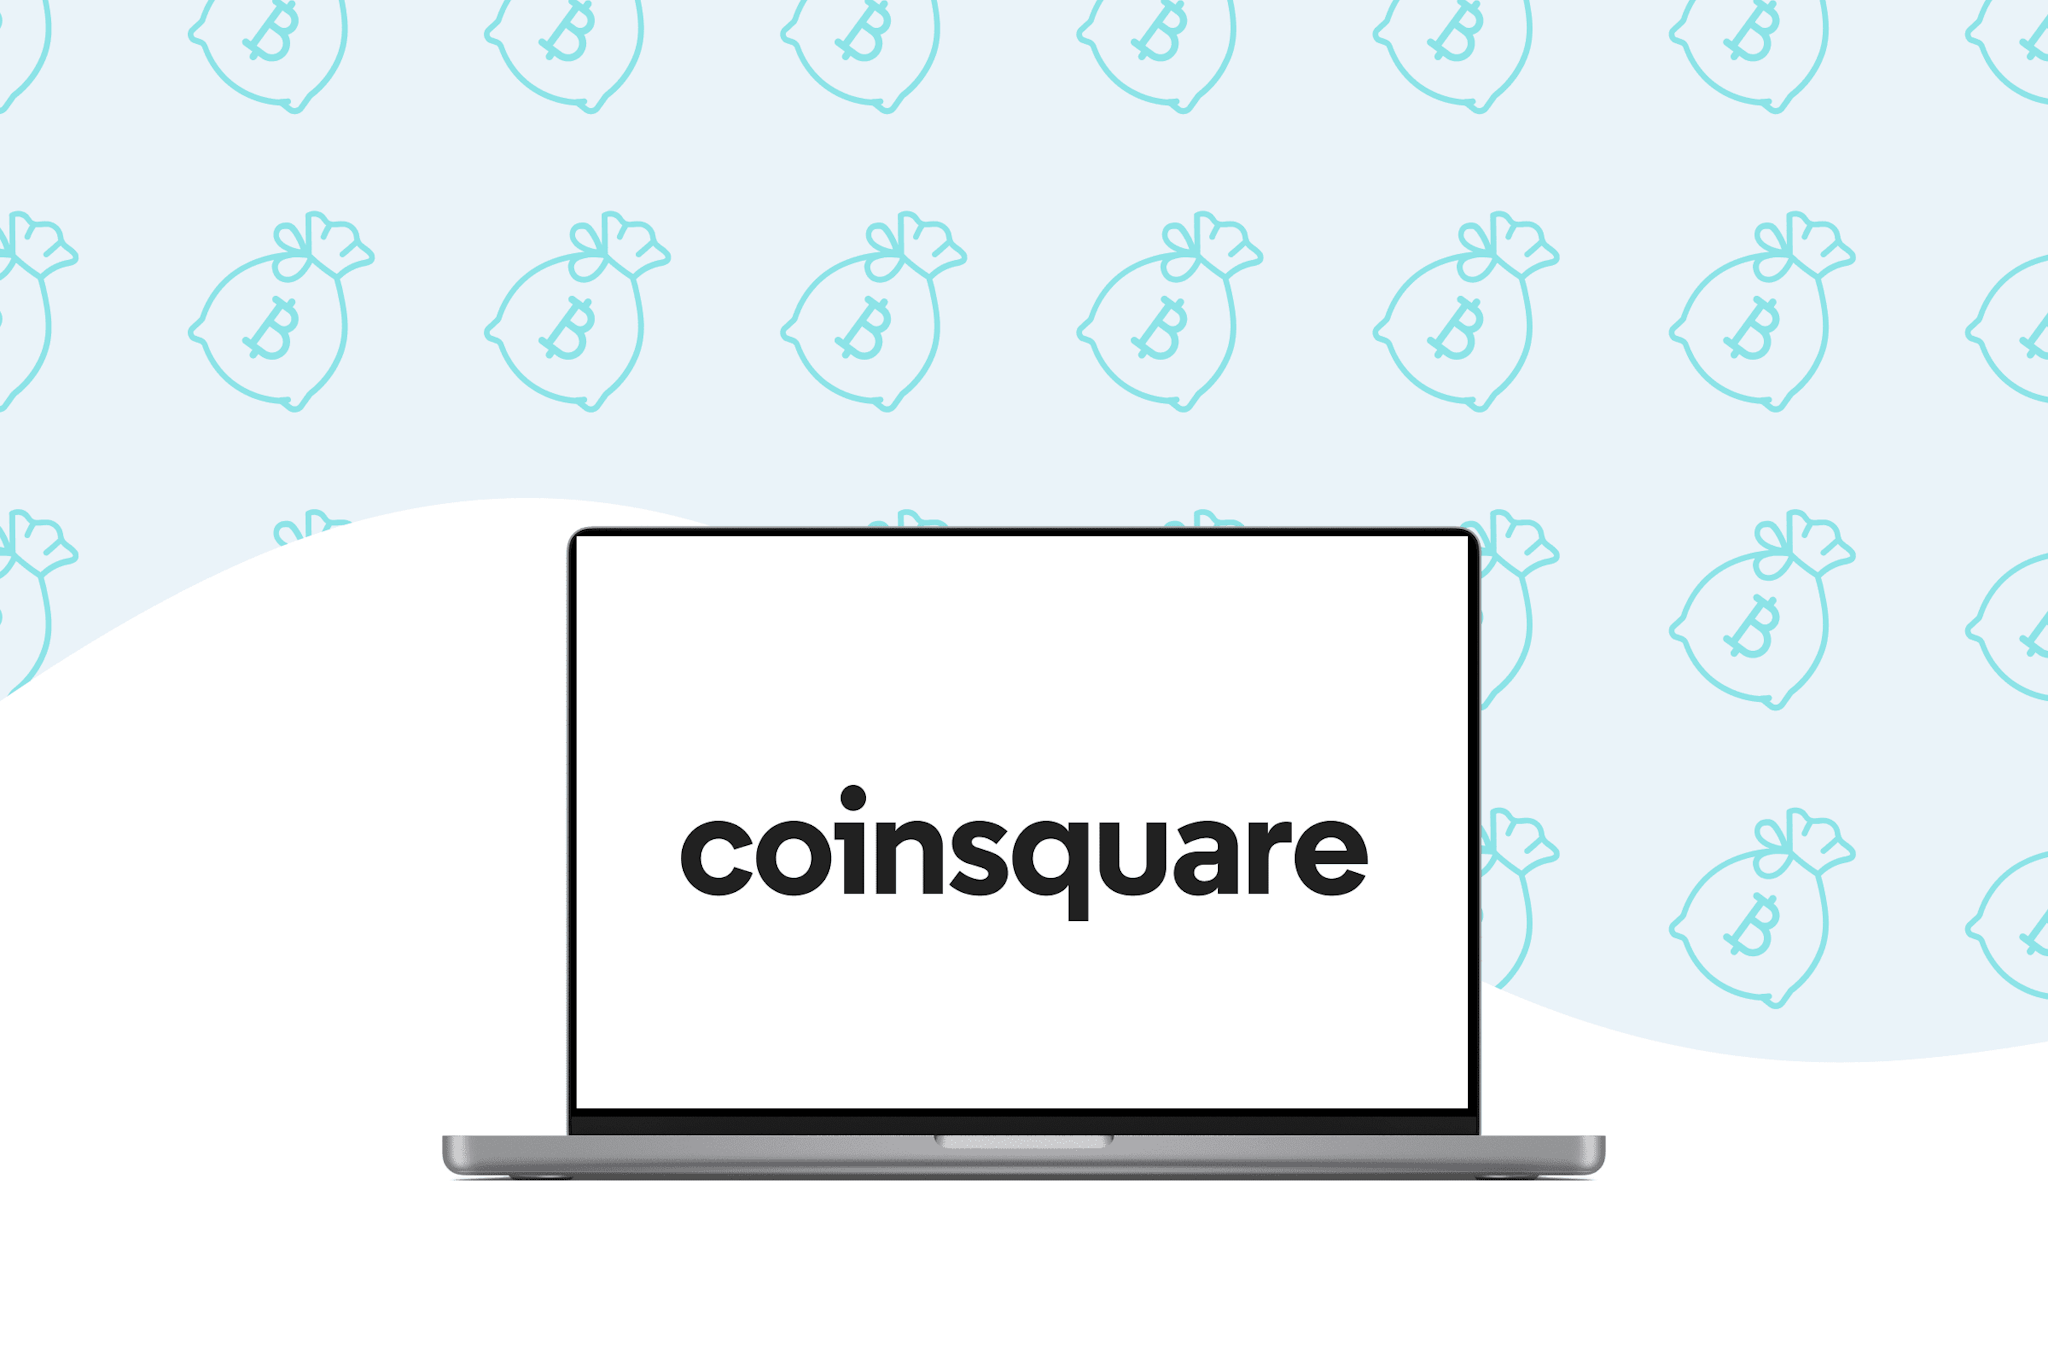 Learn how to buy Bitcoin with Coinbase, a popular cryptocurrency coinsquare exchange platform